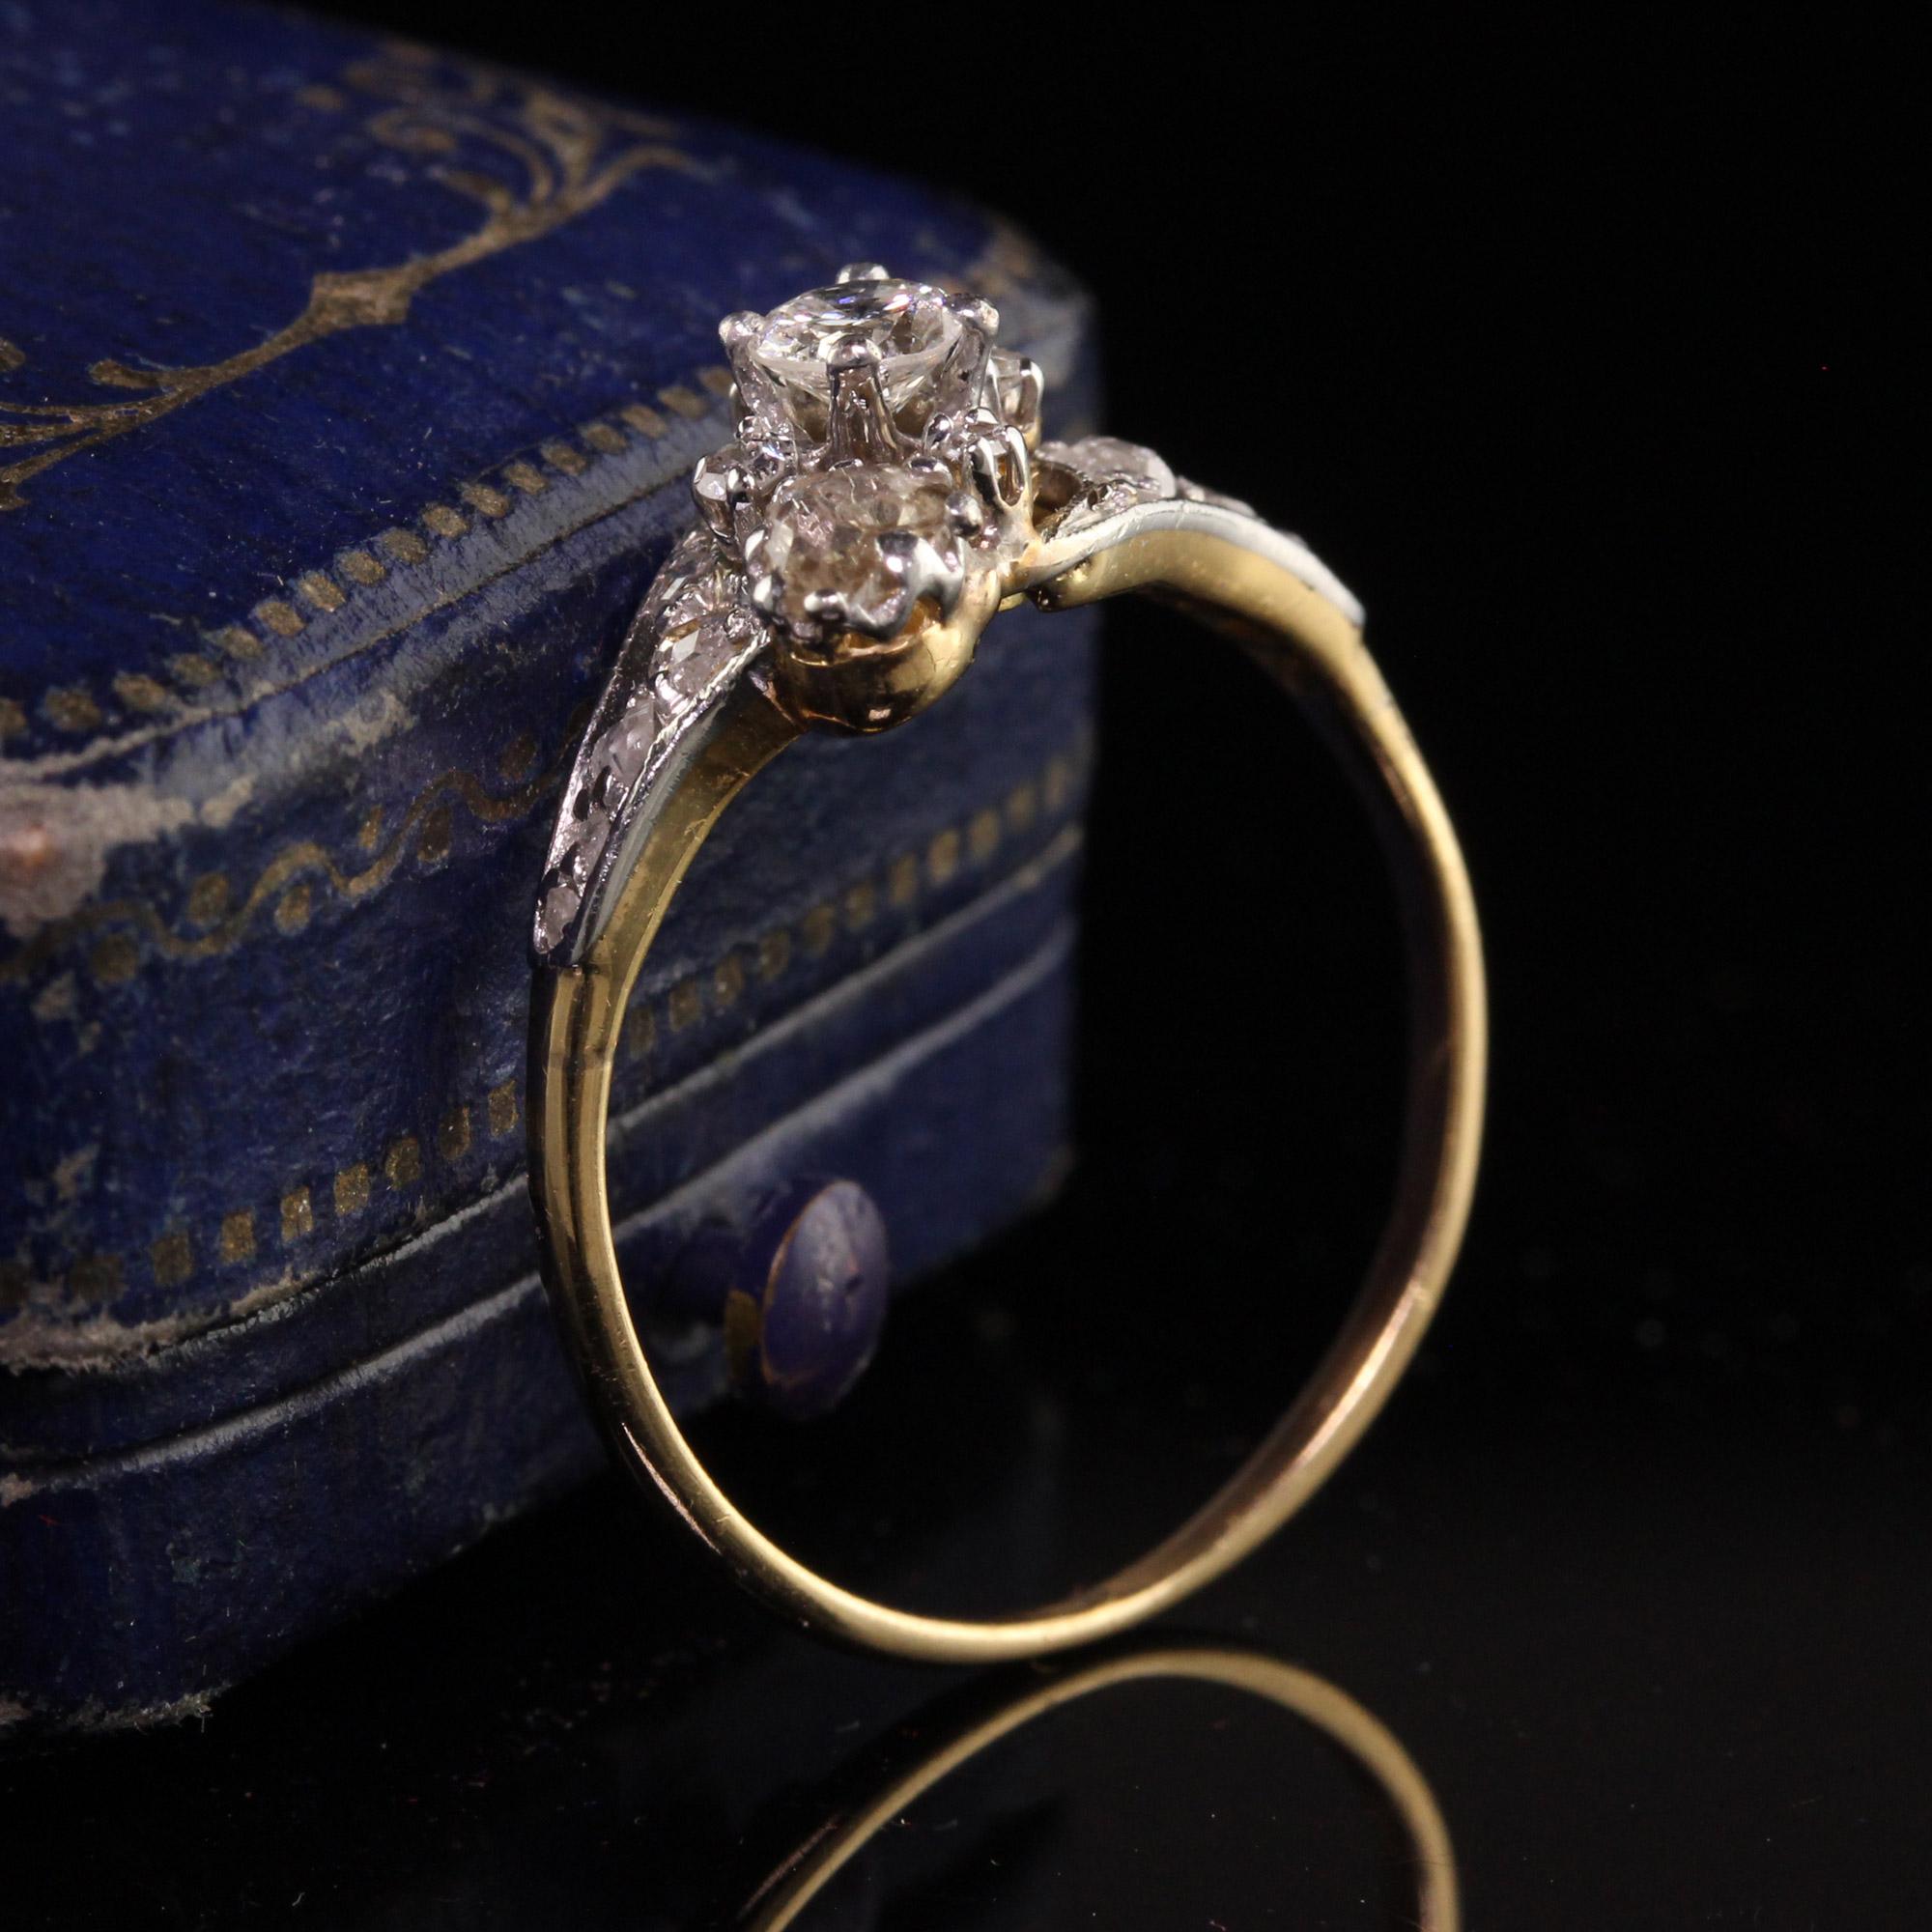 Antique Edwardian 18k Yellow Gold and Platinum Rose Cut Diamond Ring In Good Condition For Sale In Great Neck, NY